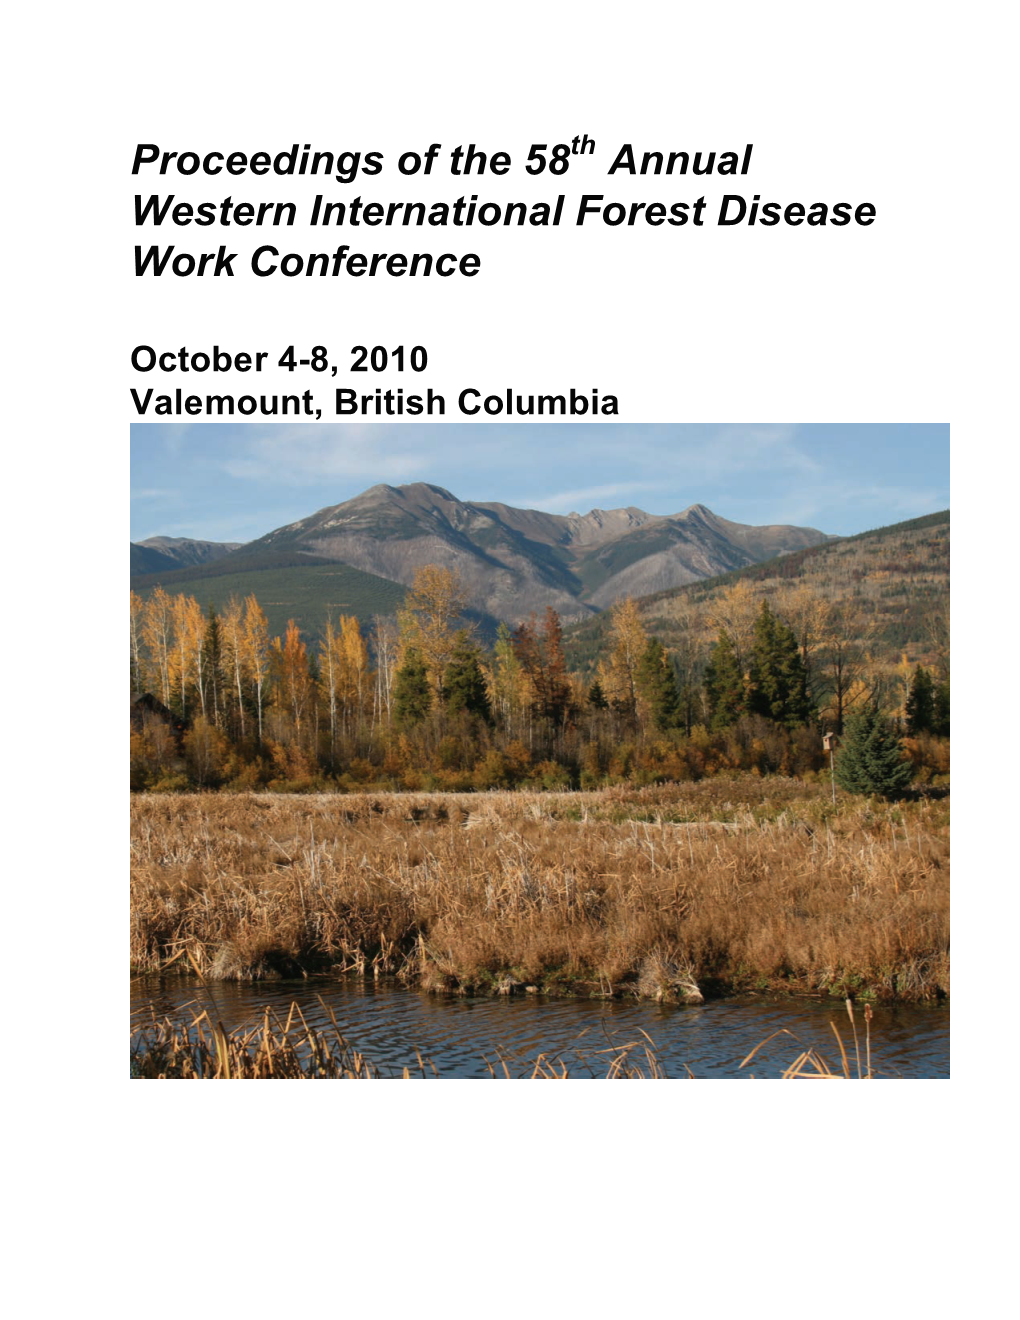 Proceedings of the 58 Annual Western International Forest Disease Work Conference